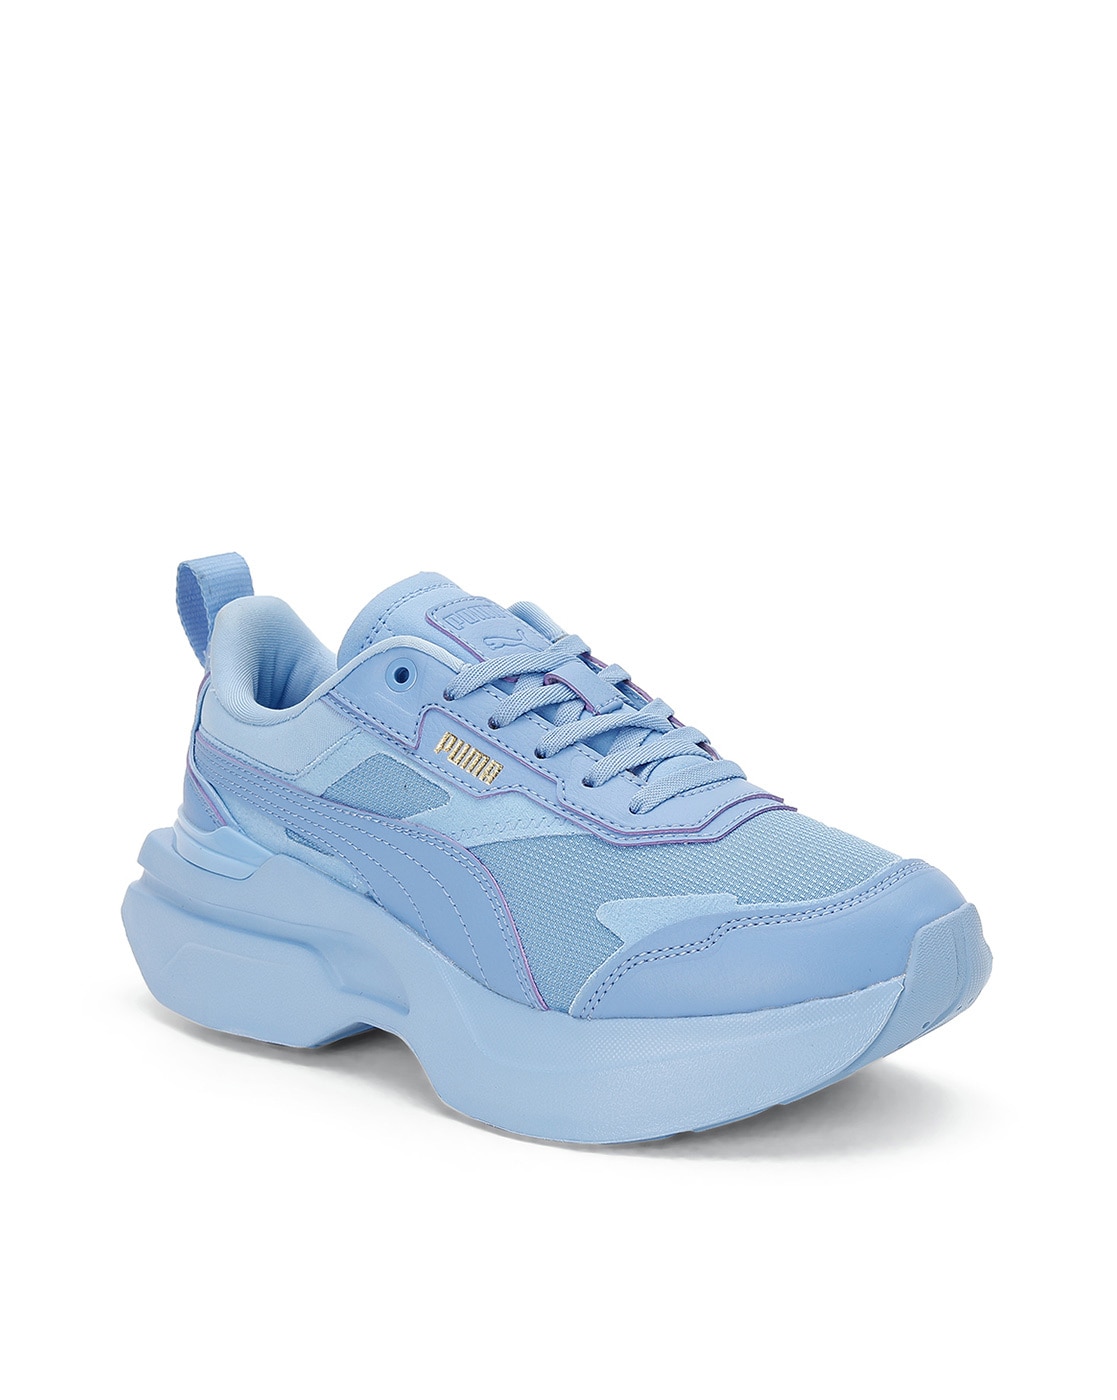 Shop Aqua Blue Basketball Shoes with great discounts and prices